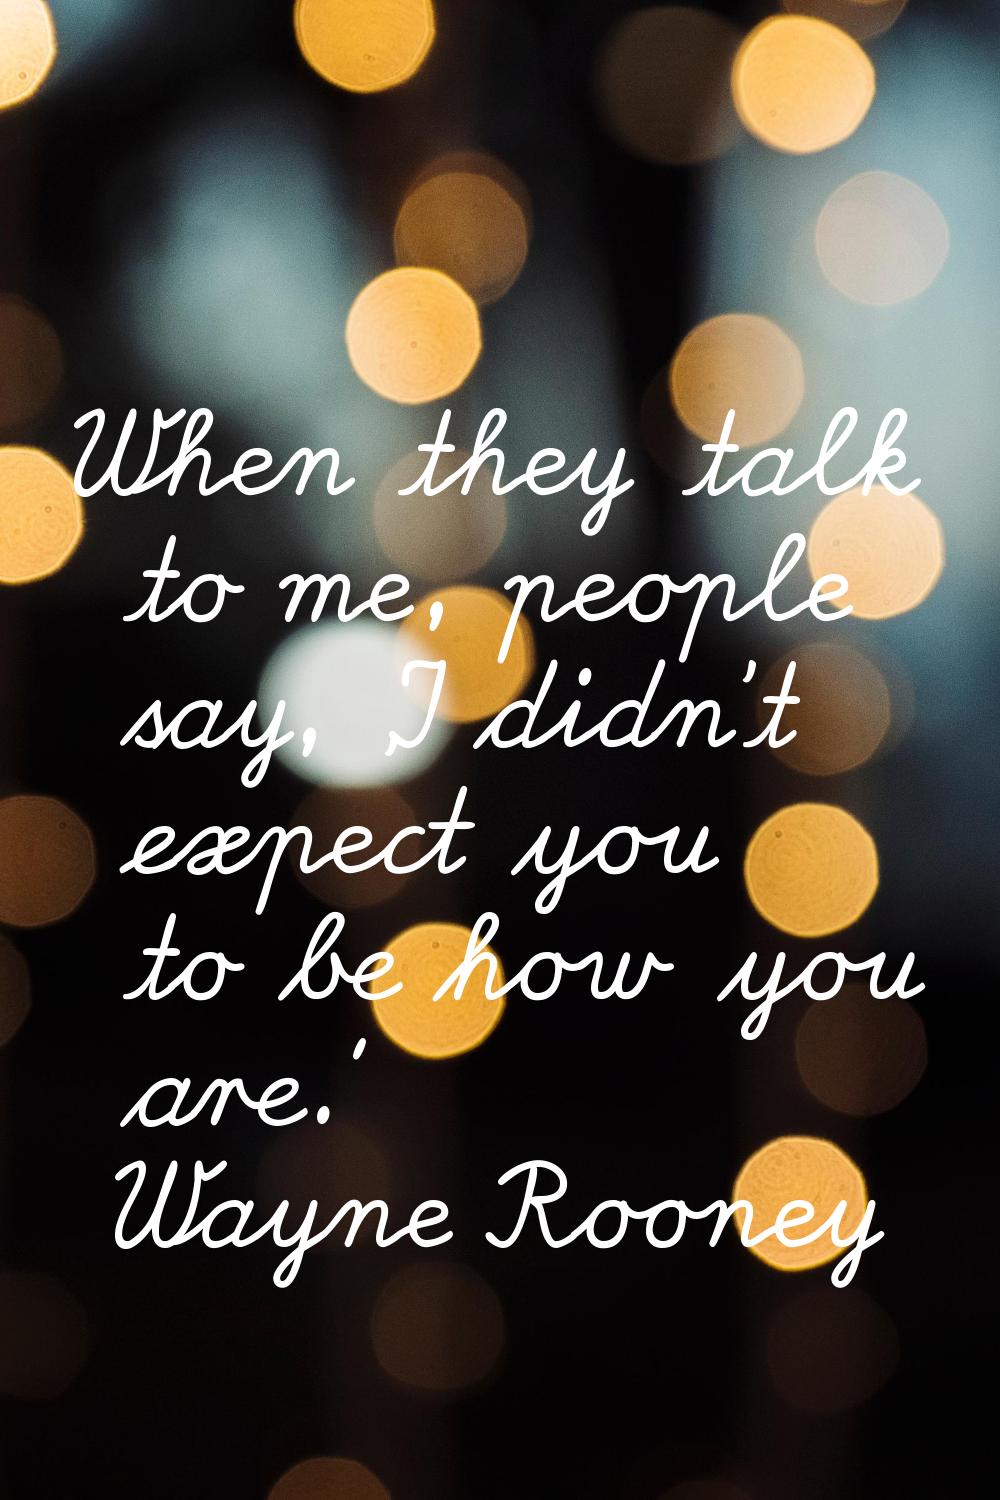 When they talk to me, people say, 'I didn't expect you to be how you are.'